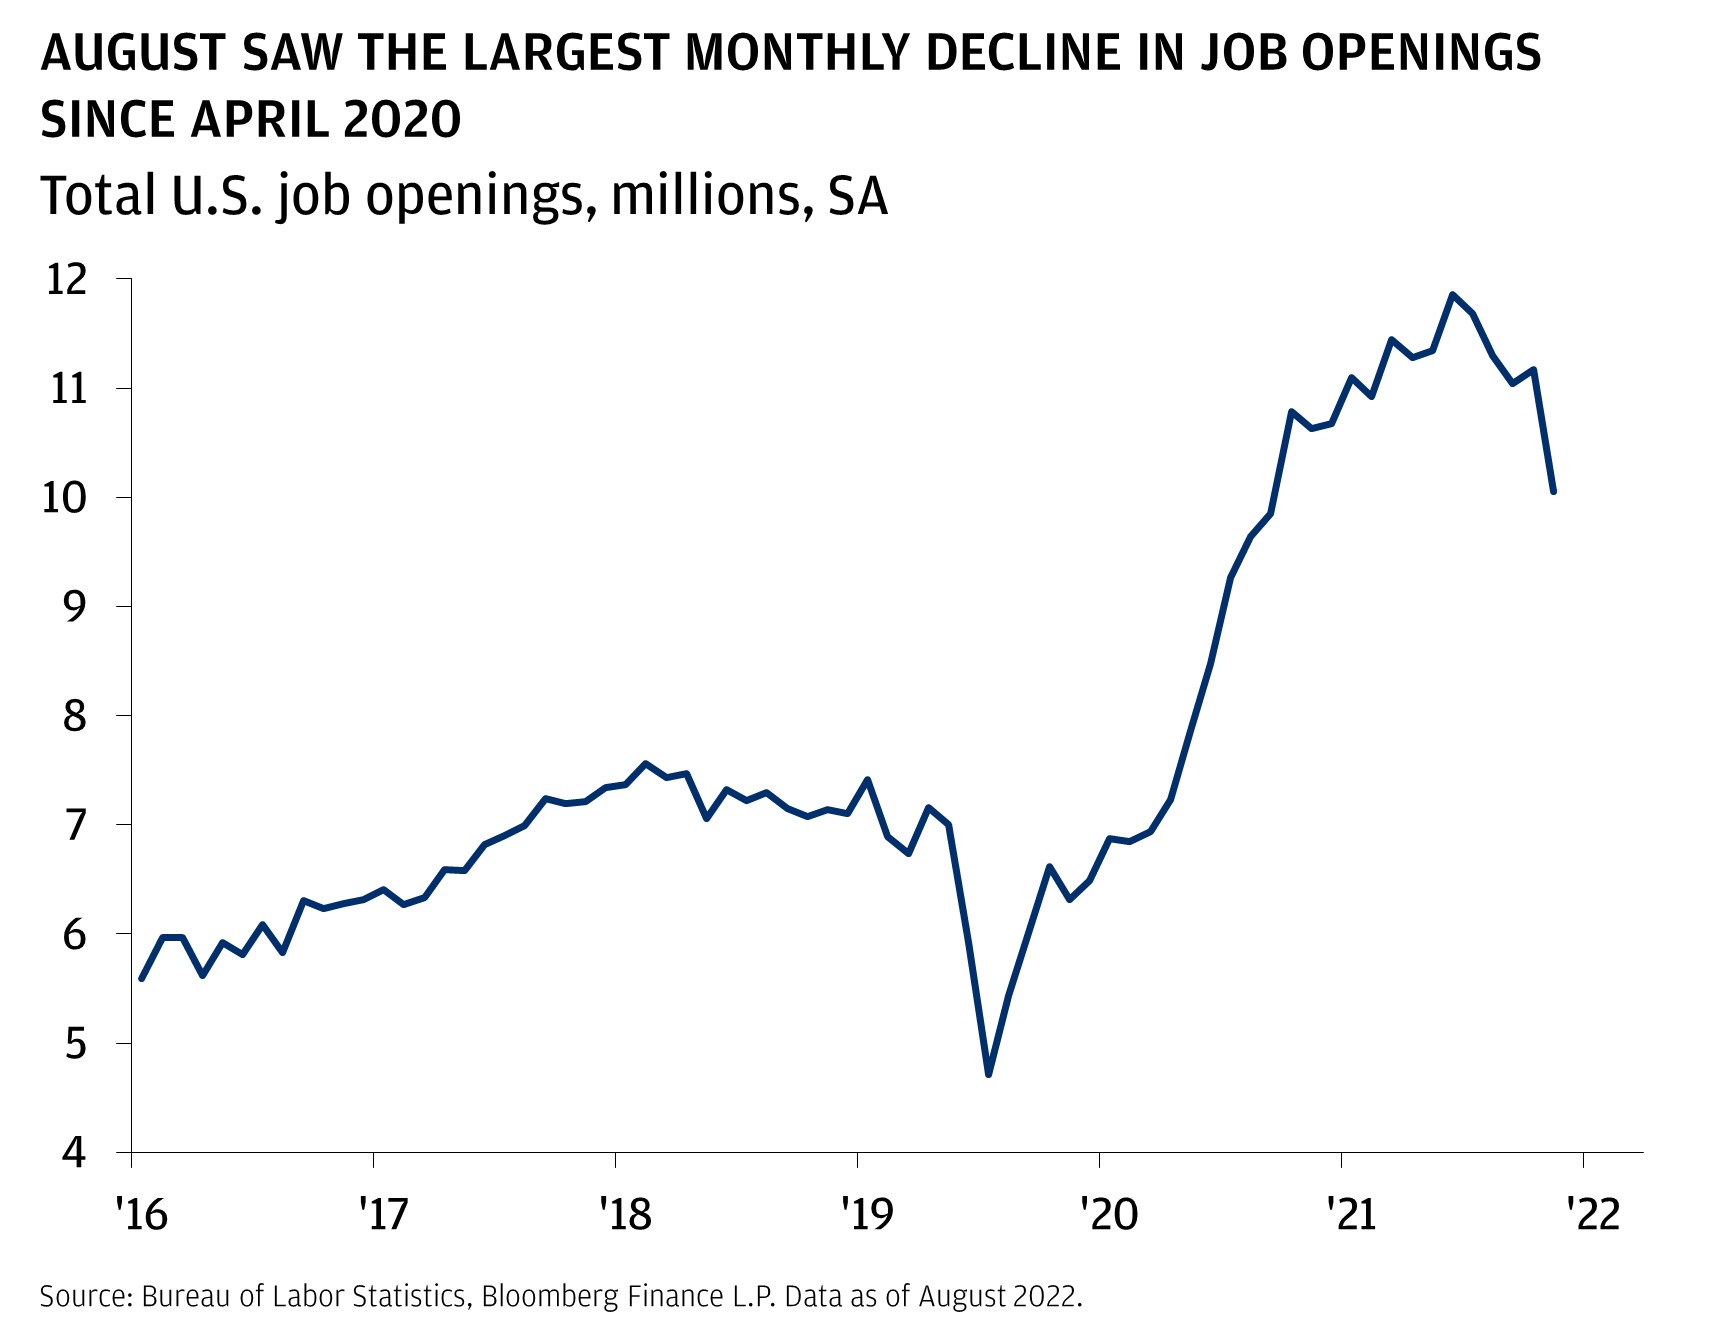 This chart shows the total U.S. job openings, millions, SA from October 2016 to September 2022.